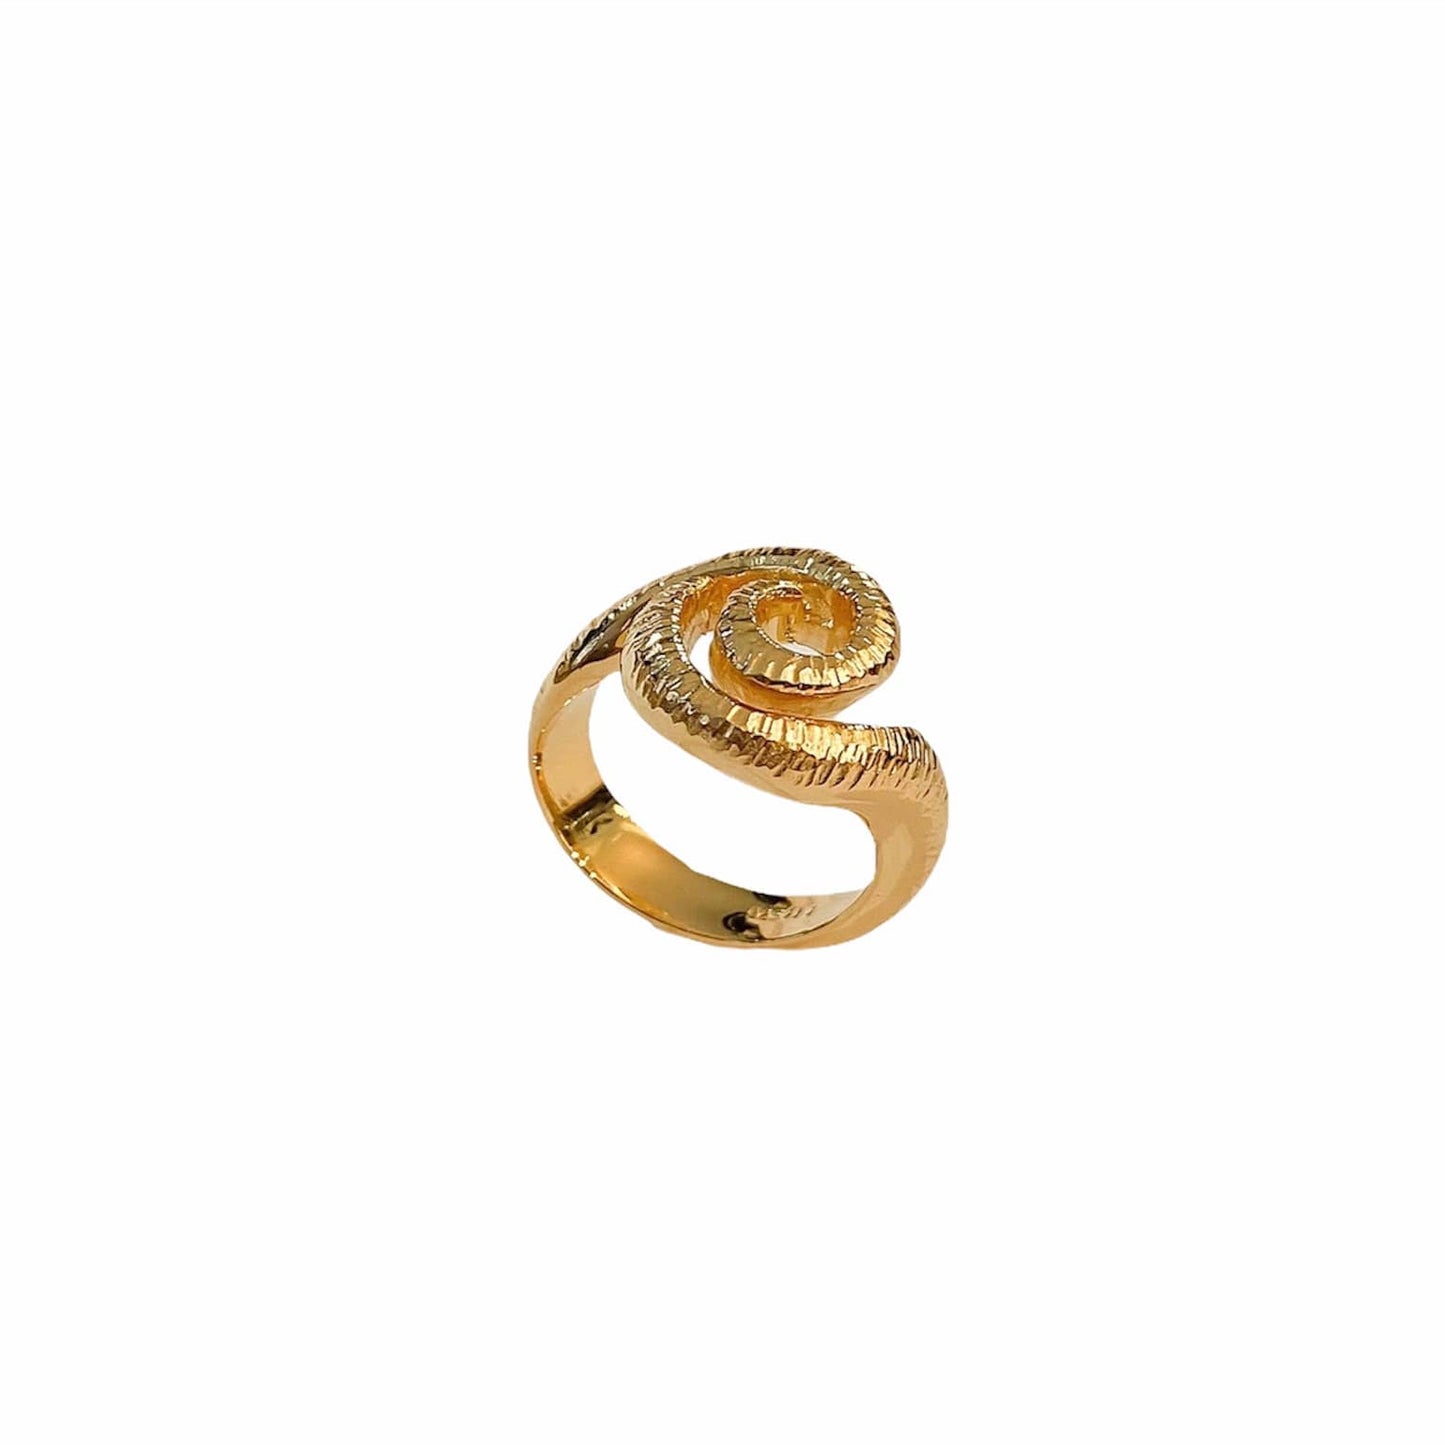 Surrea Raw gold plated silver ring, top view.